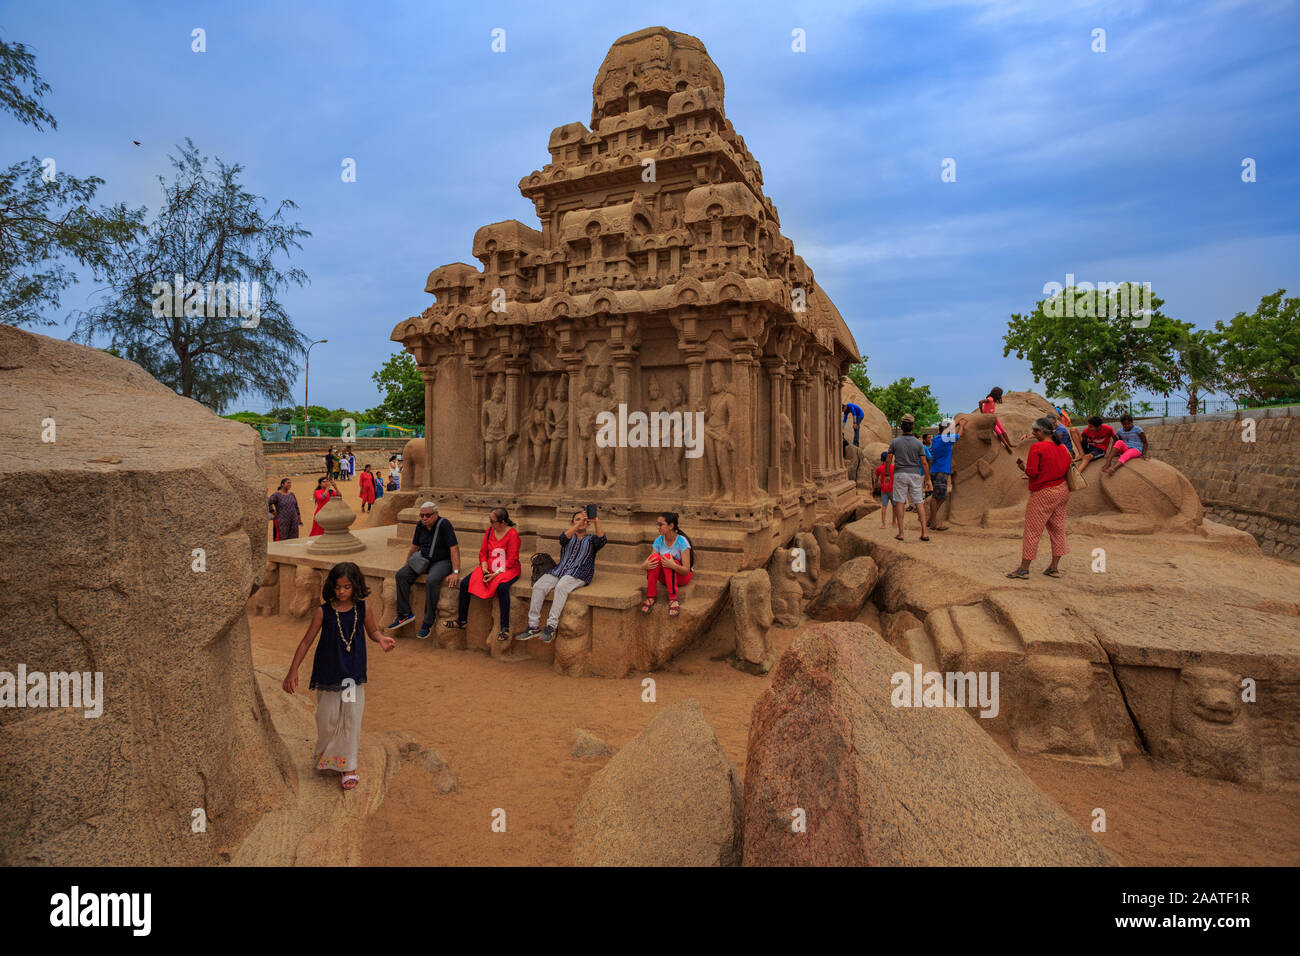 Five Rathas (Pancha Rathas) - The famous temple of Mahabalipuram (India). The structure is made of monolithic stone. Stock Photo